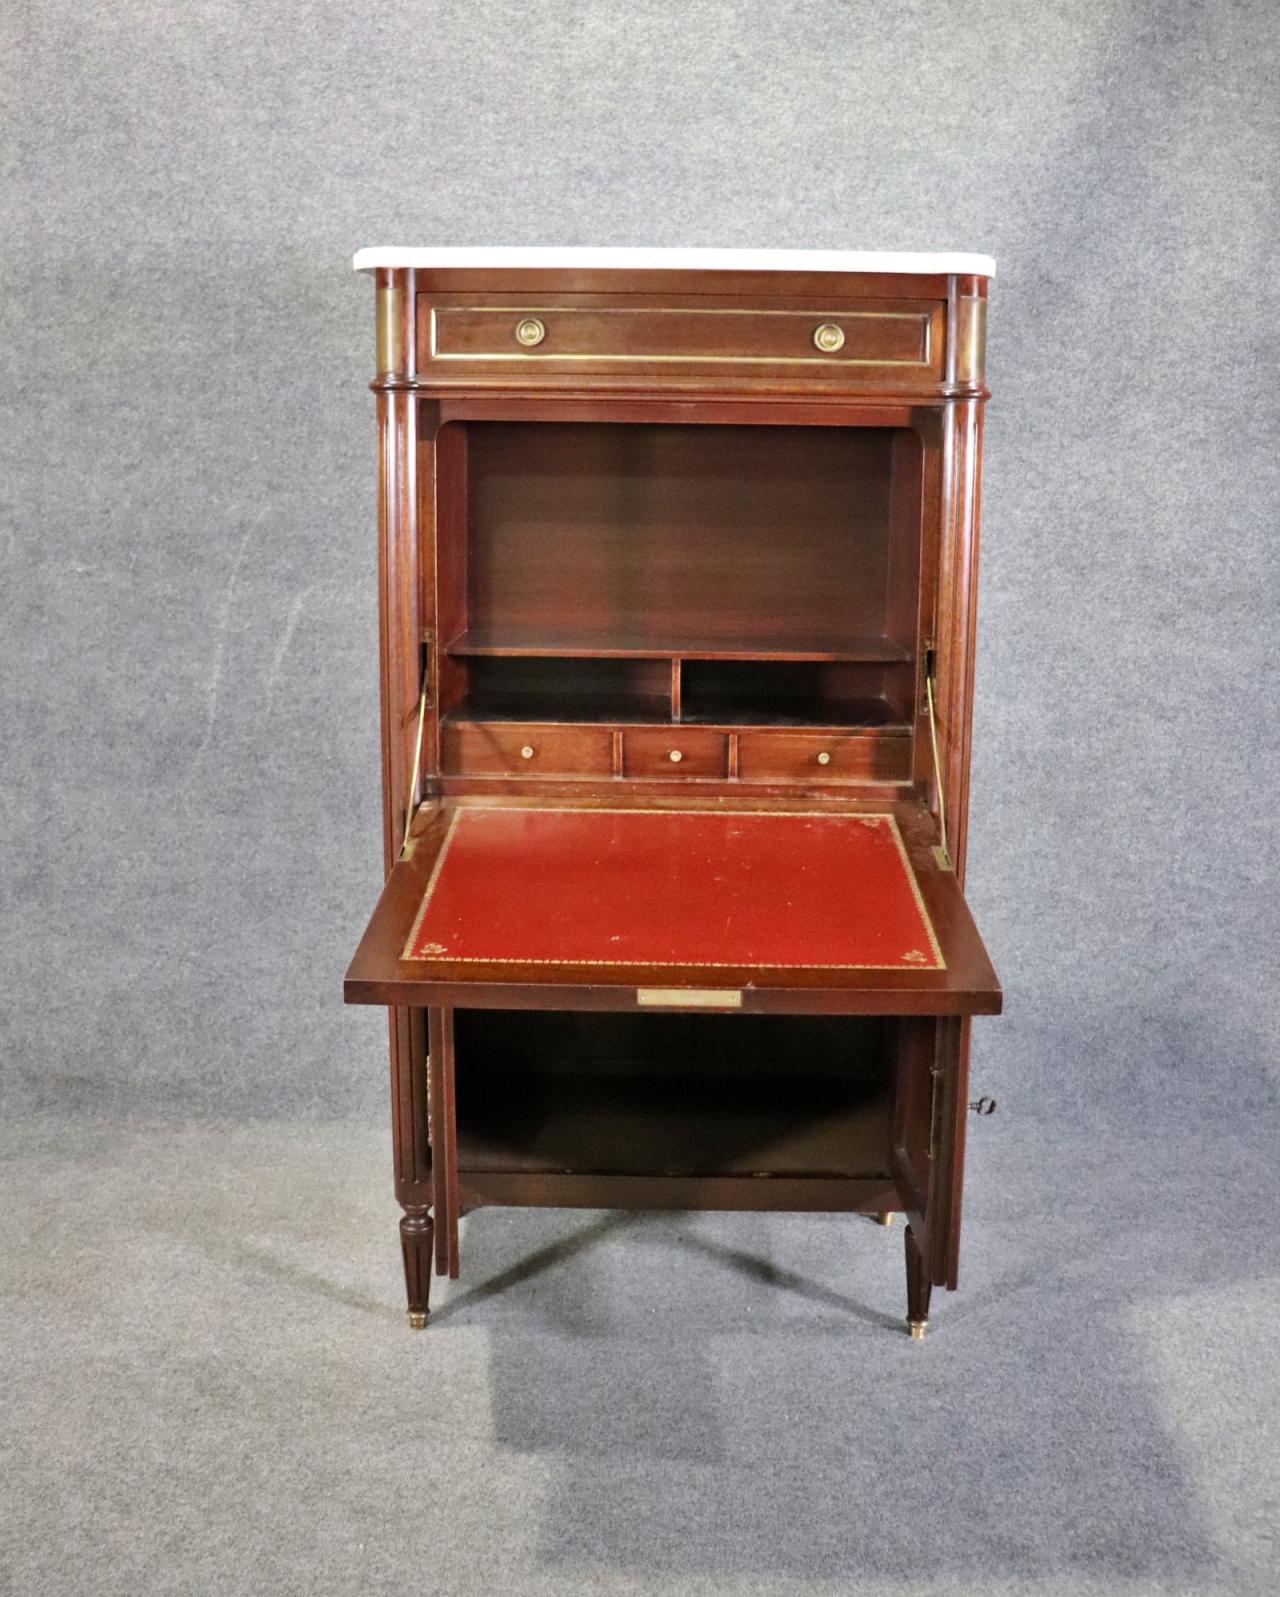 Marble top. One dovetailed drawer on top. One drop down door containing  leather and fitted interior. Two doors on bottom containing one shelf. Brass or bronze hardware and accents. Gilt accents.  57 1/8